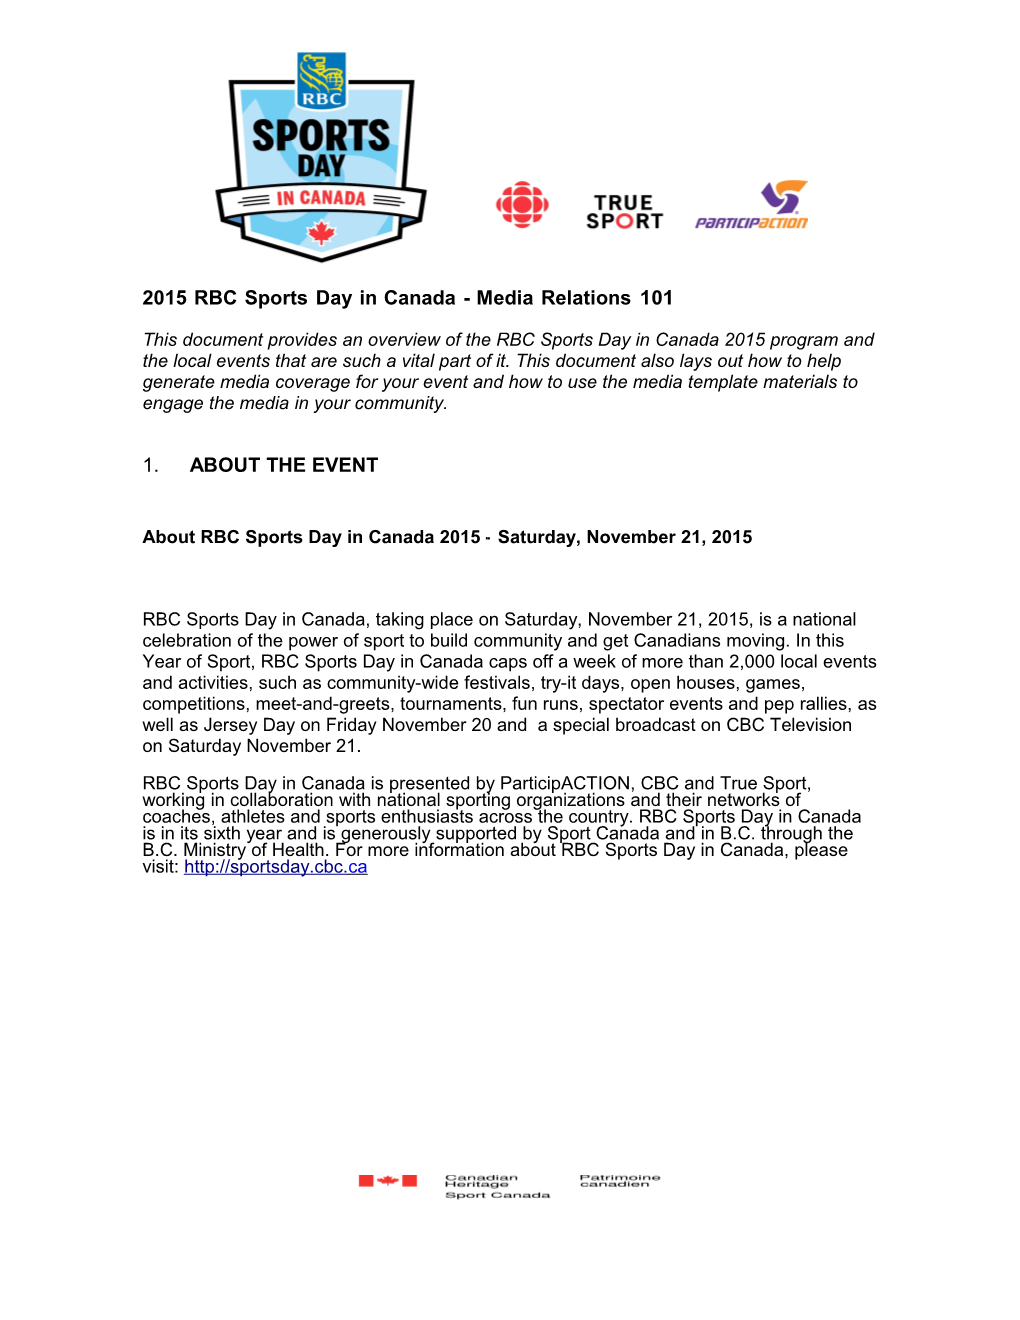 About RBC Sports Day in Canada 2015- Saturday, November 21, 2015